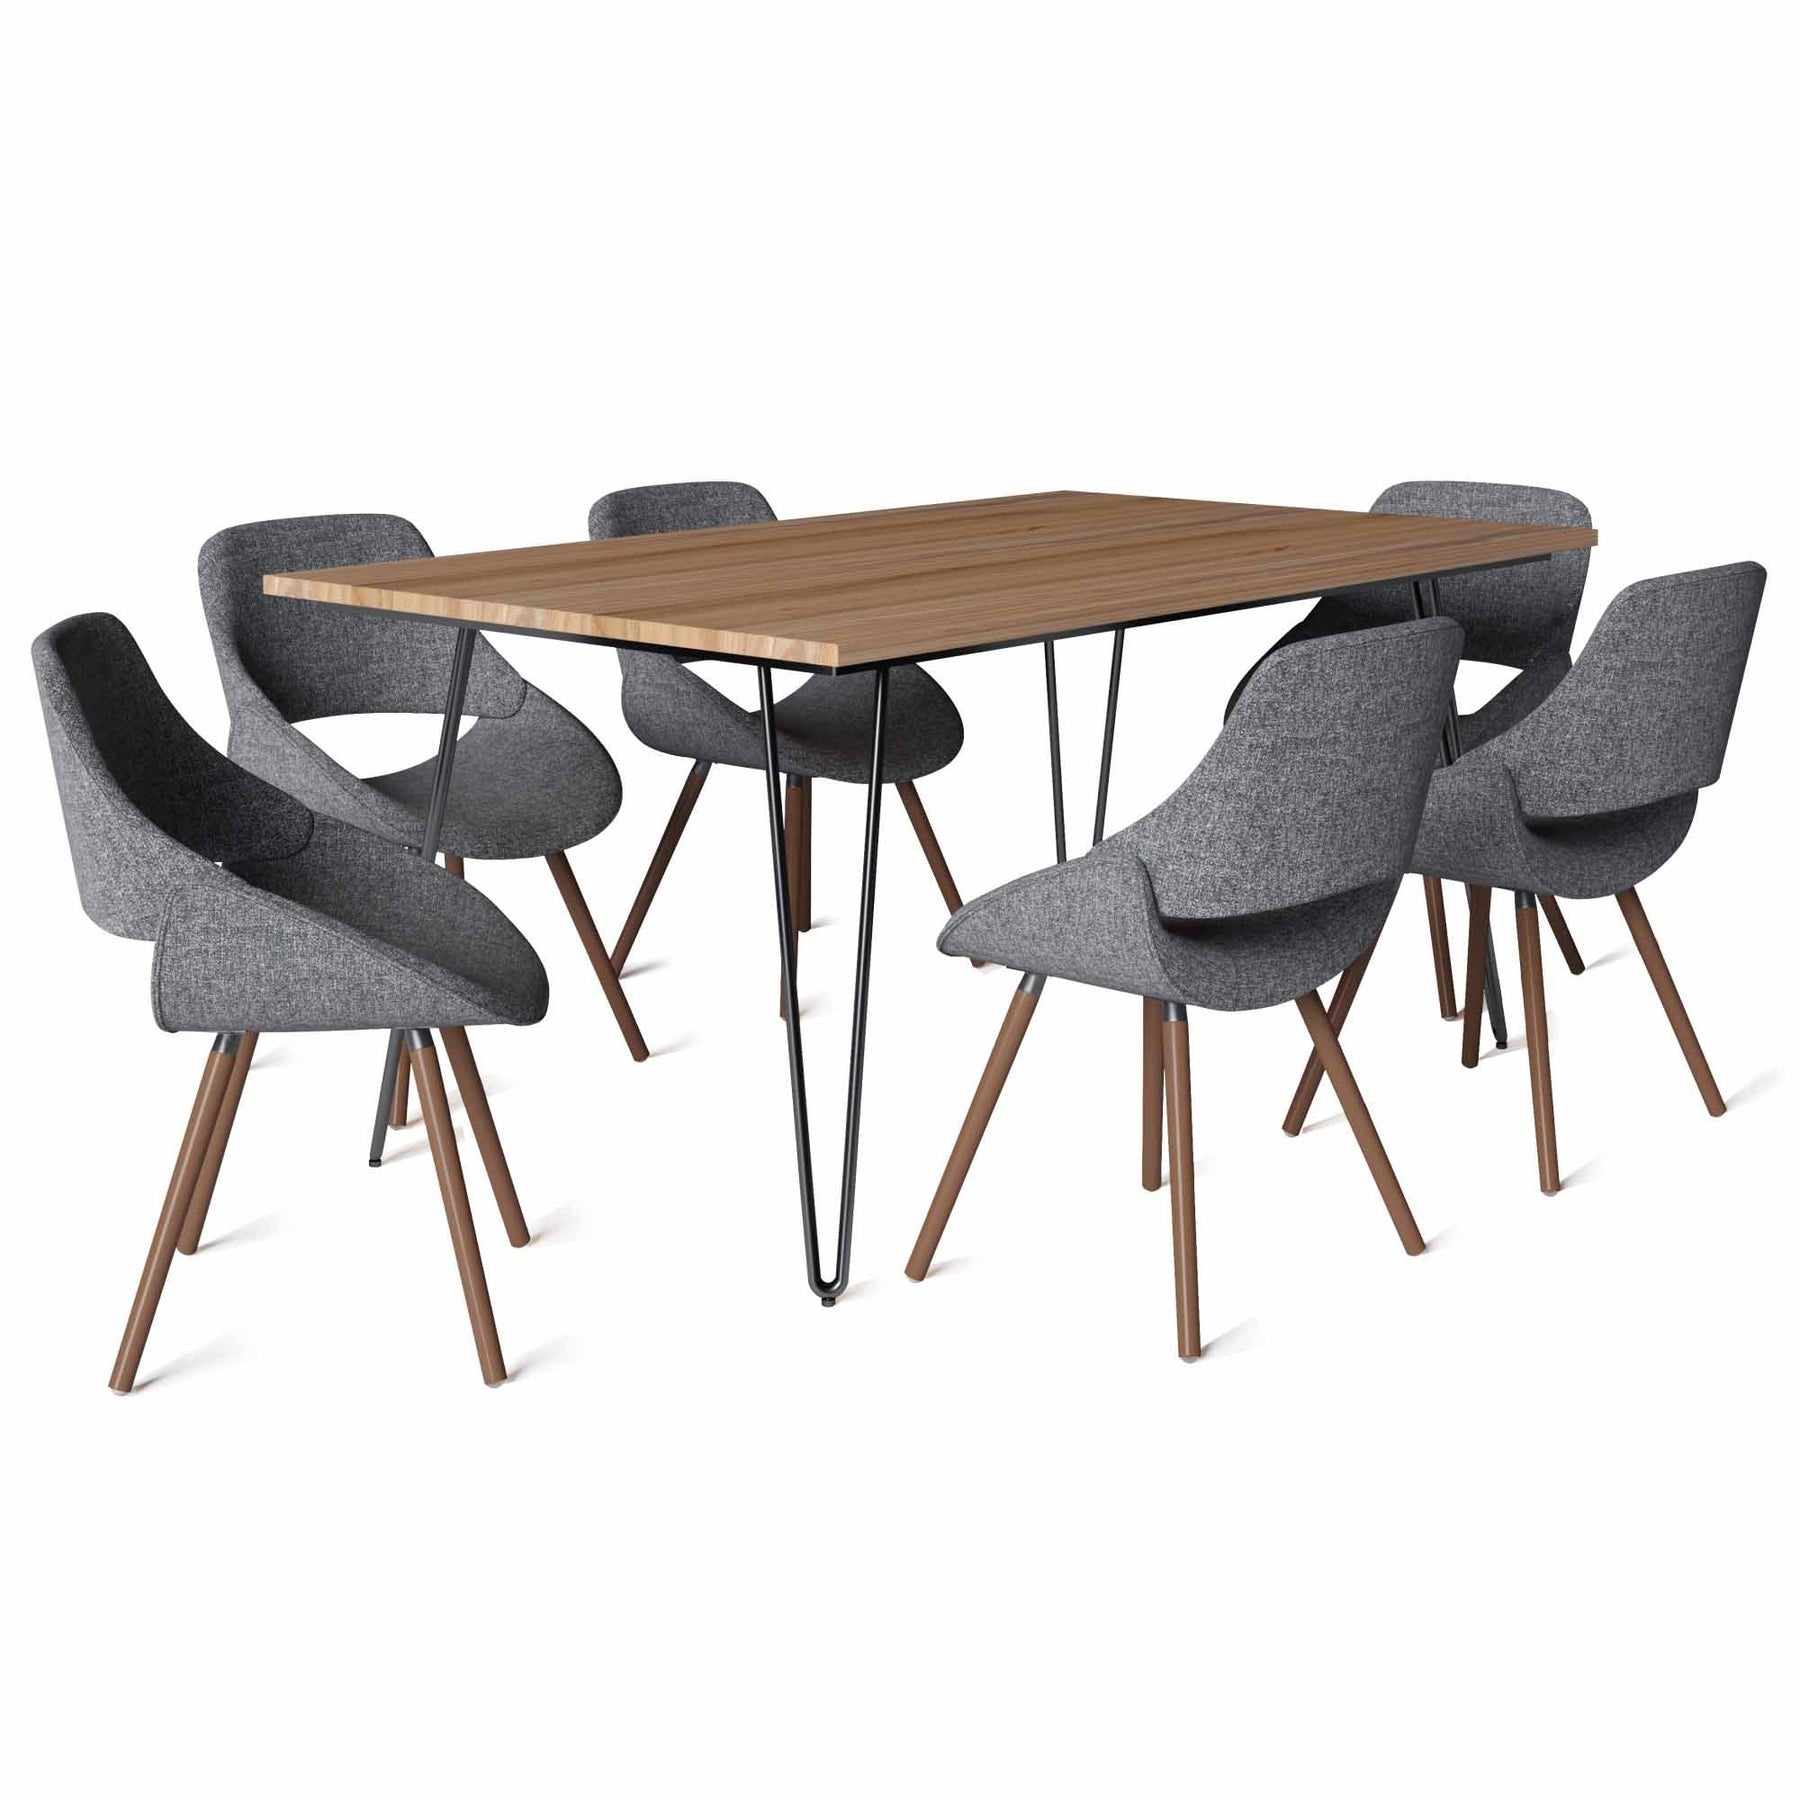 Grey and Natural Woven Fabric | Malden IV 7 Piece Dining Set